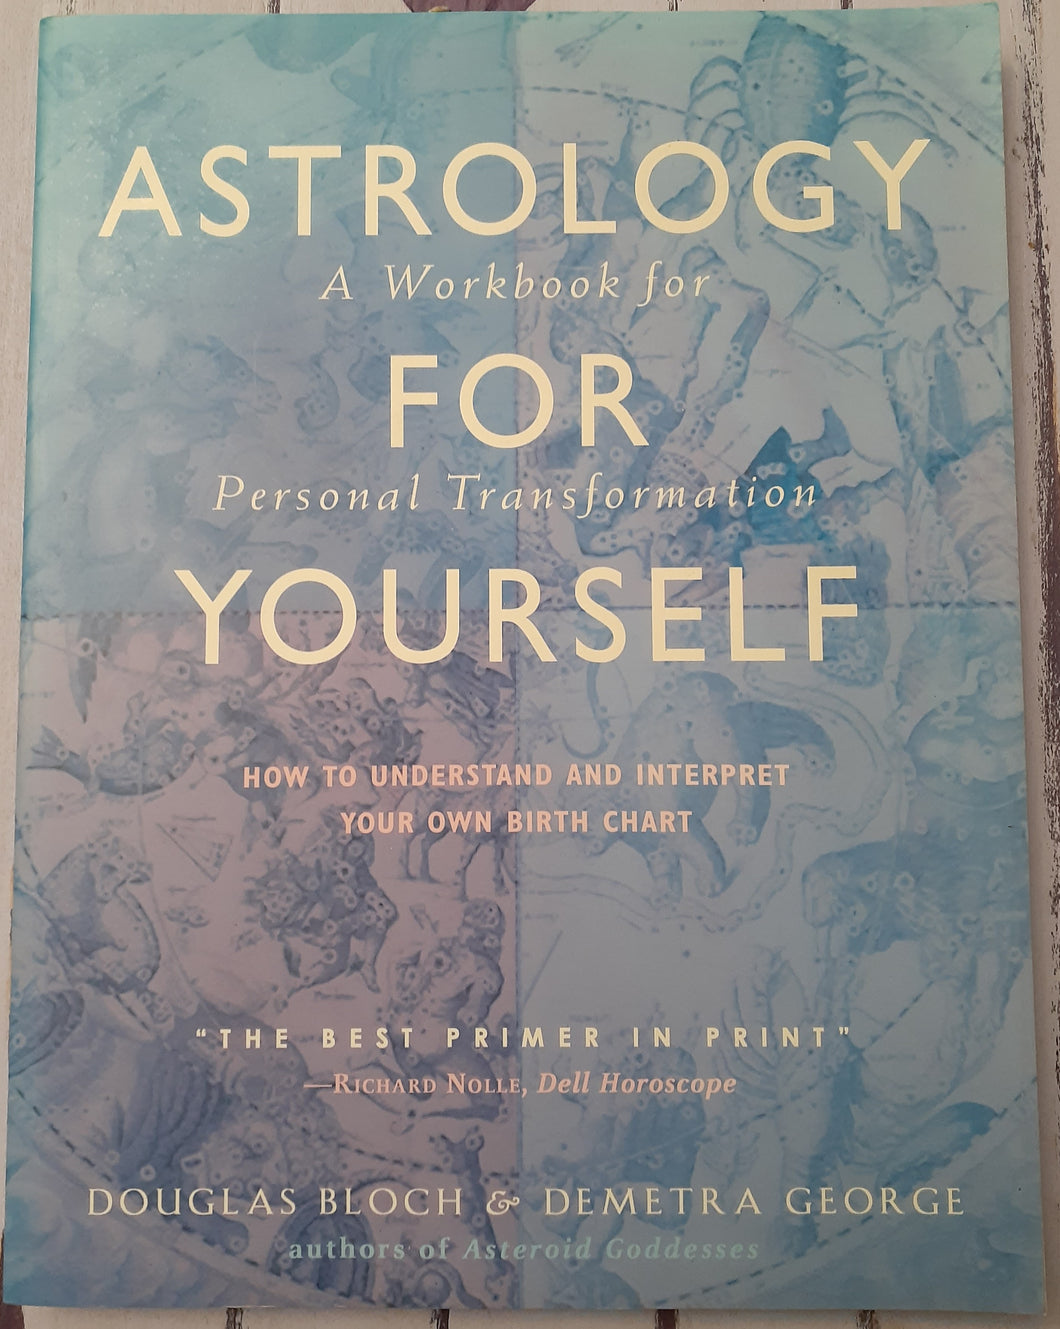 Astrology for Yourself: How to Understand And Interpret Your Own Birth Chart